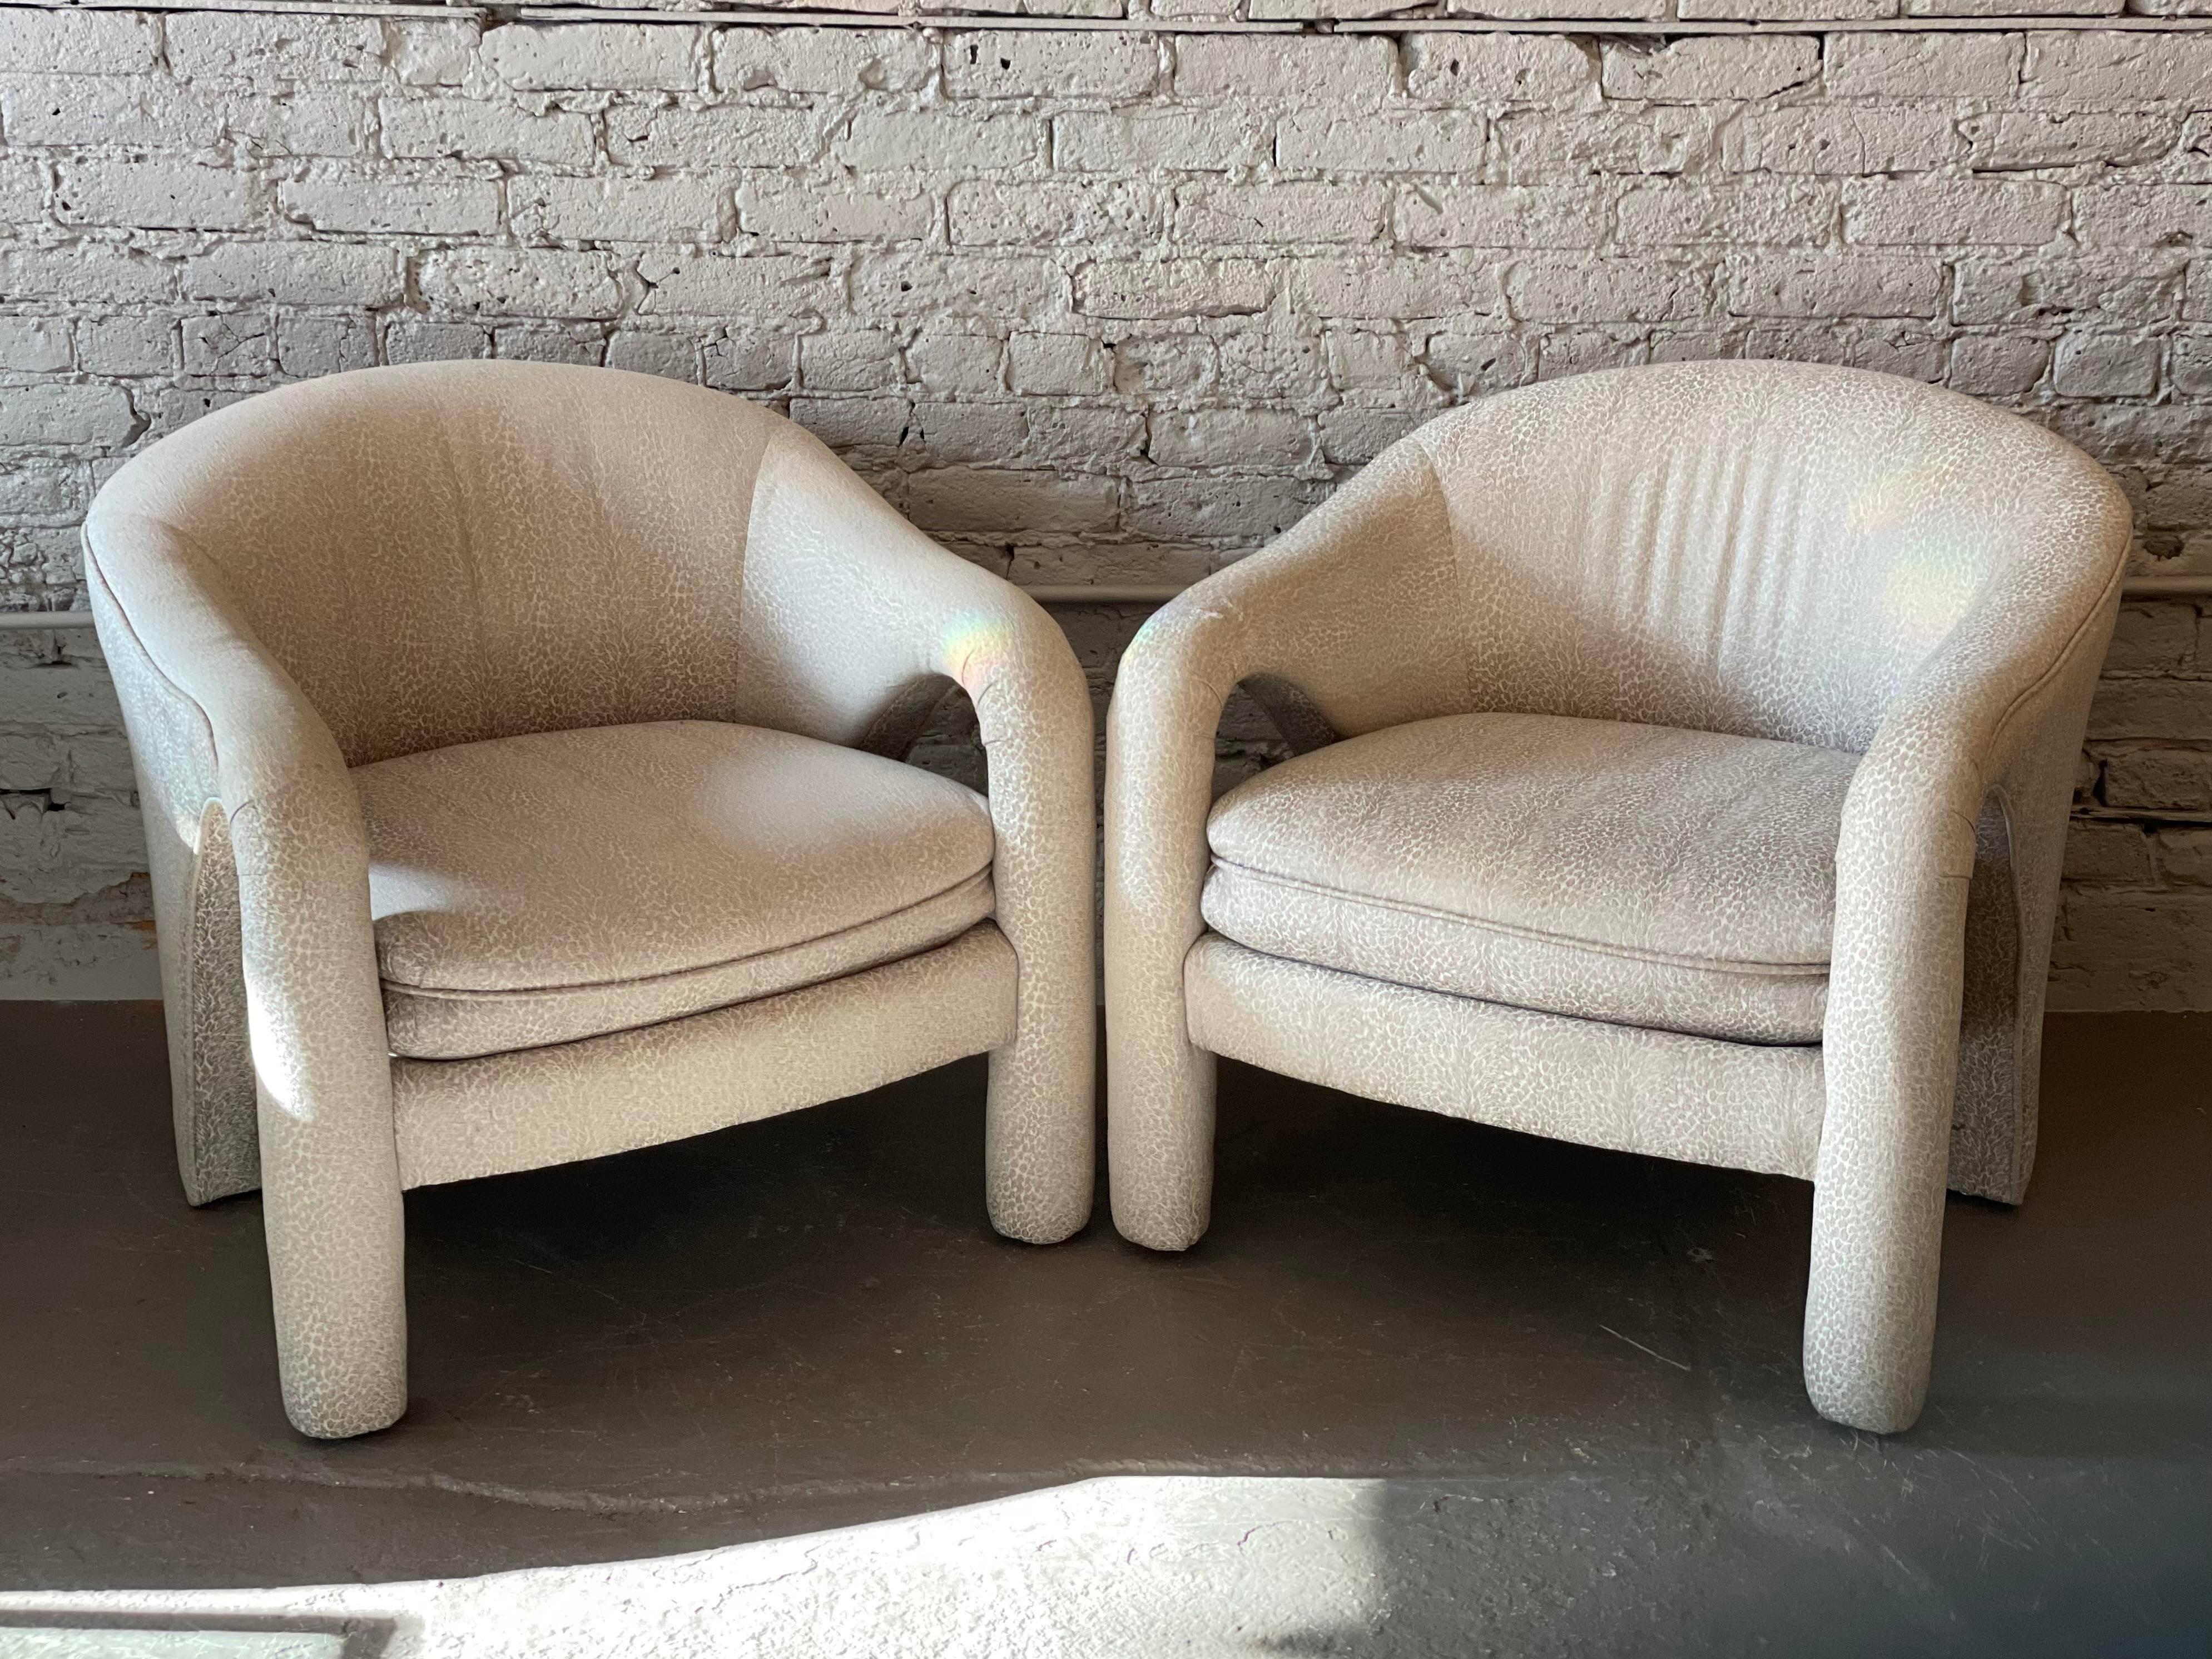 1980s Postmodern Sculptural Arc Chairs in Beige Upholstery, a Pair For Sale 3